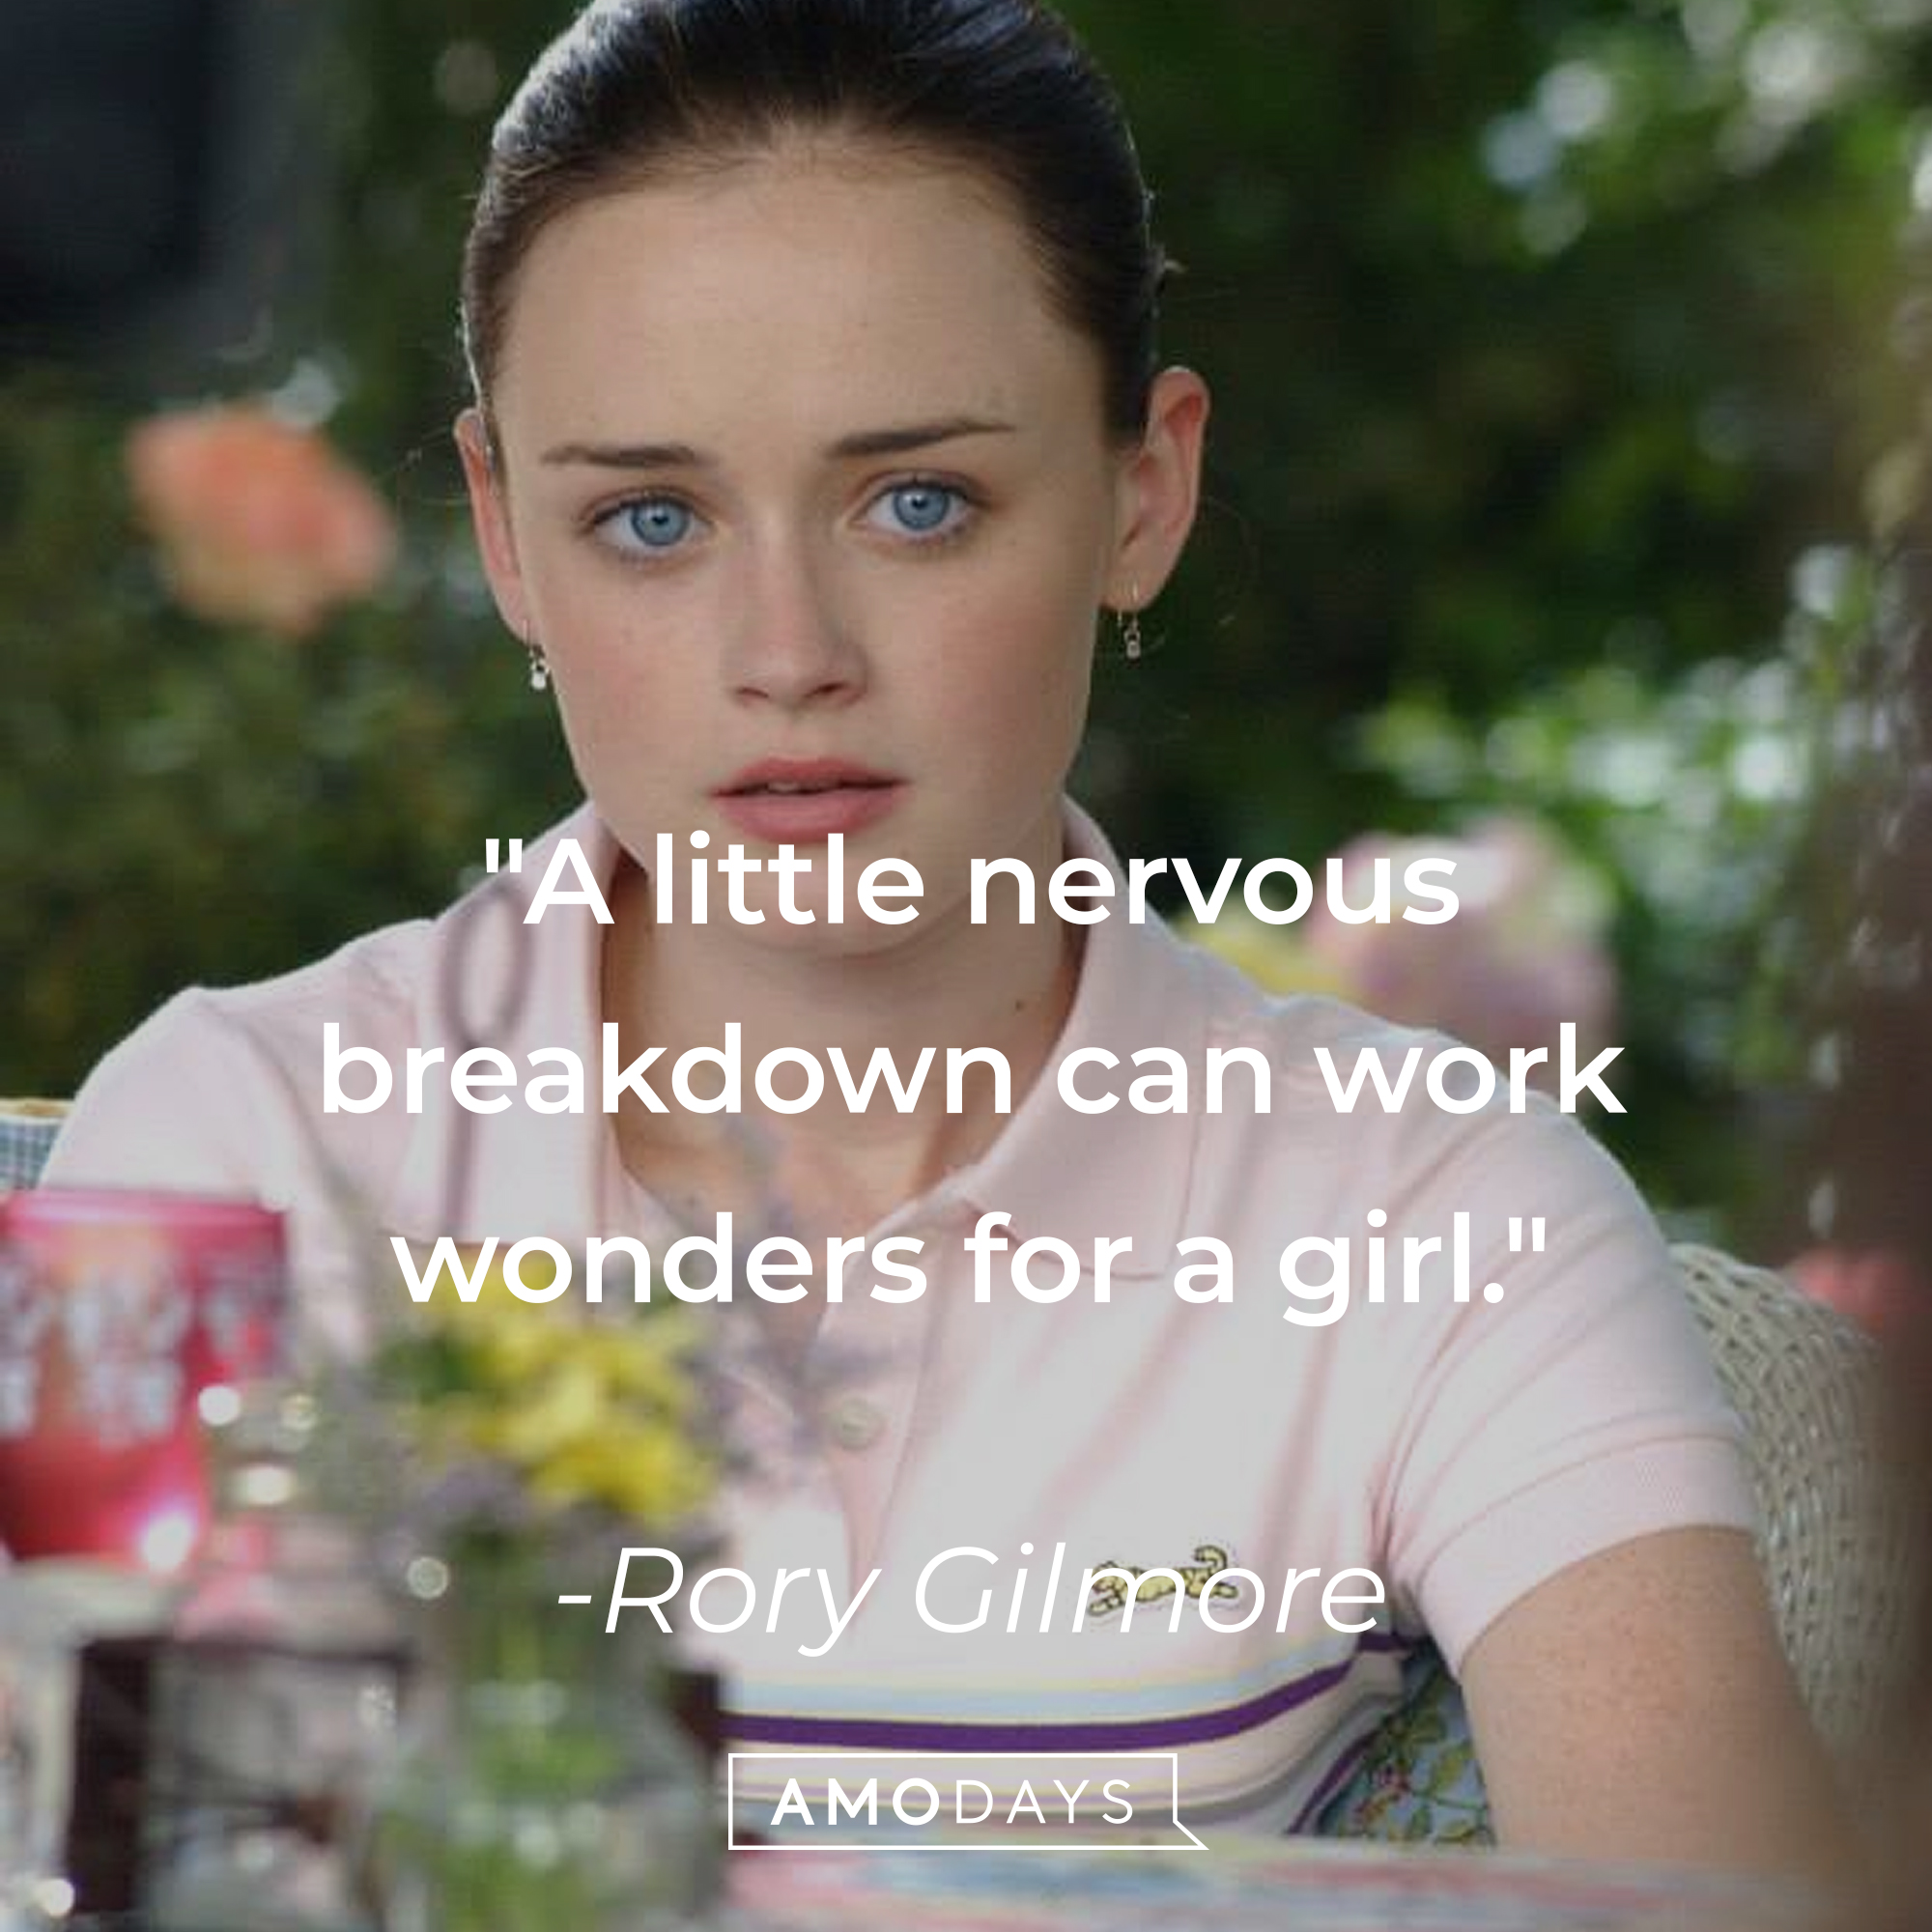 Rory Gilmore's quote: "A little nervous breakdown can work wonders for a girl." | Source: Facebook/GilmoreGirls